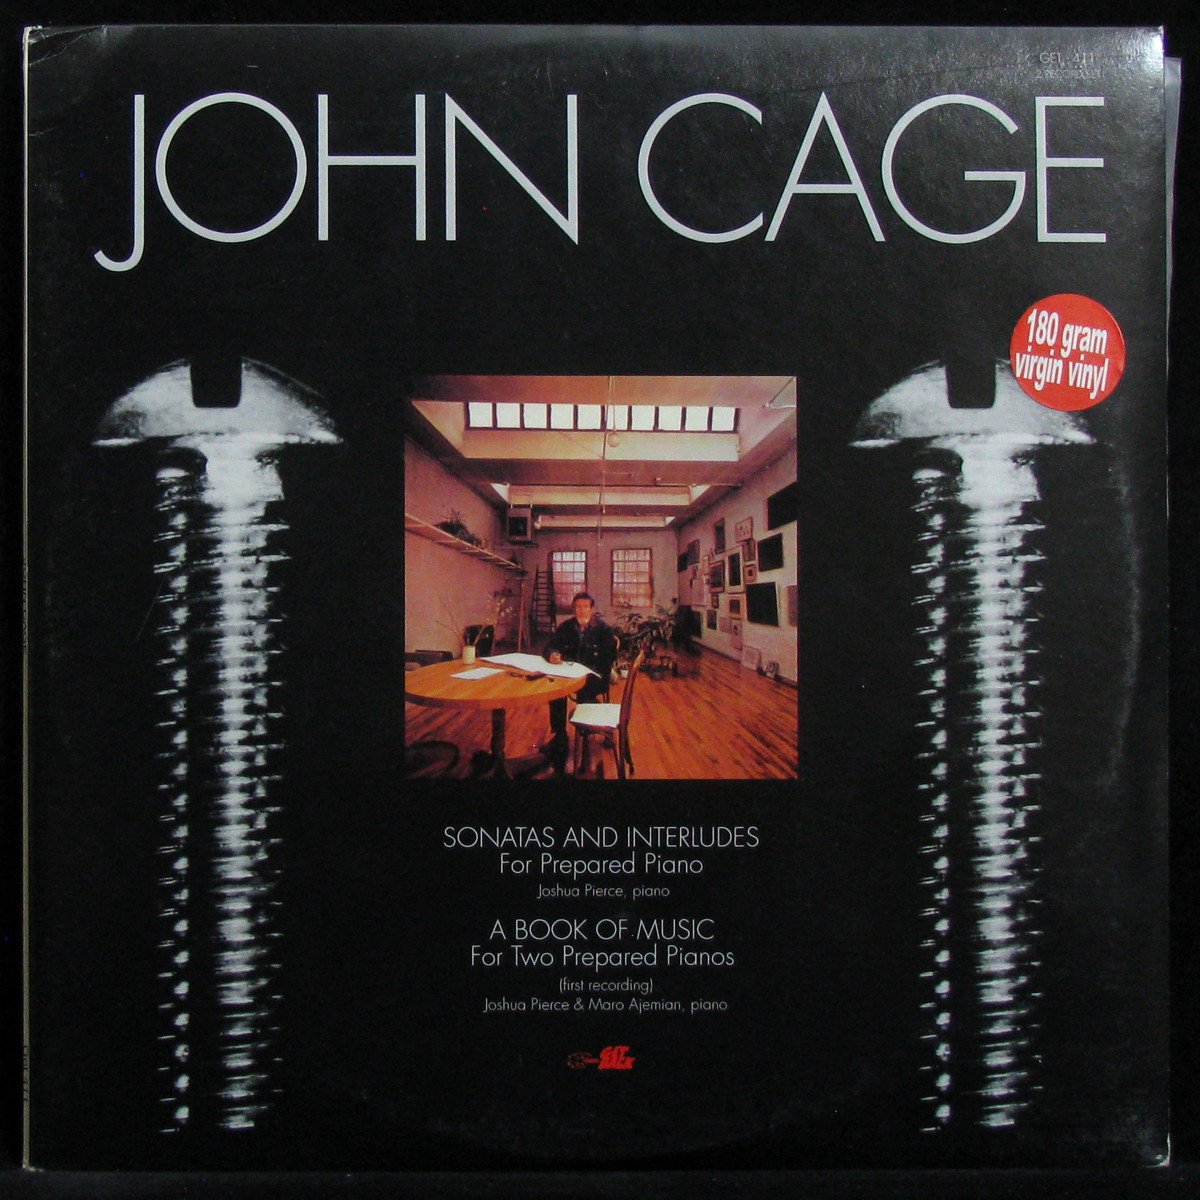 LP John Cage — Sonatas And Interludes / A Book Of Music (2LP) фото